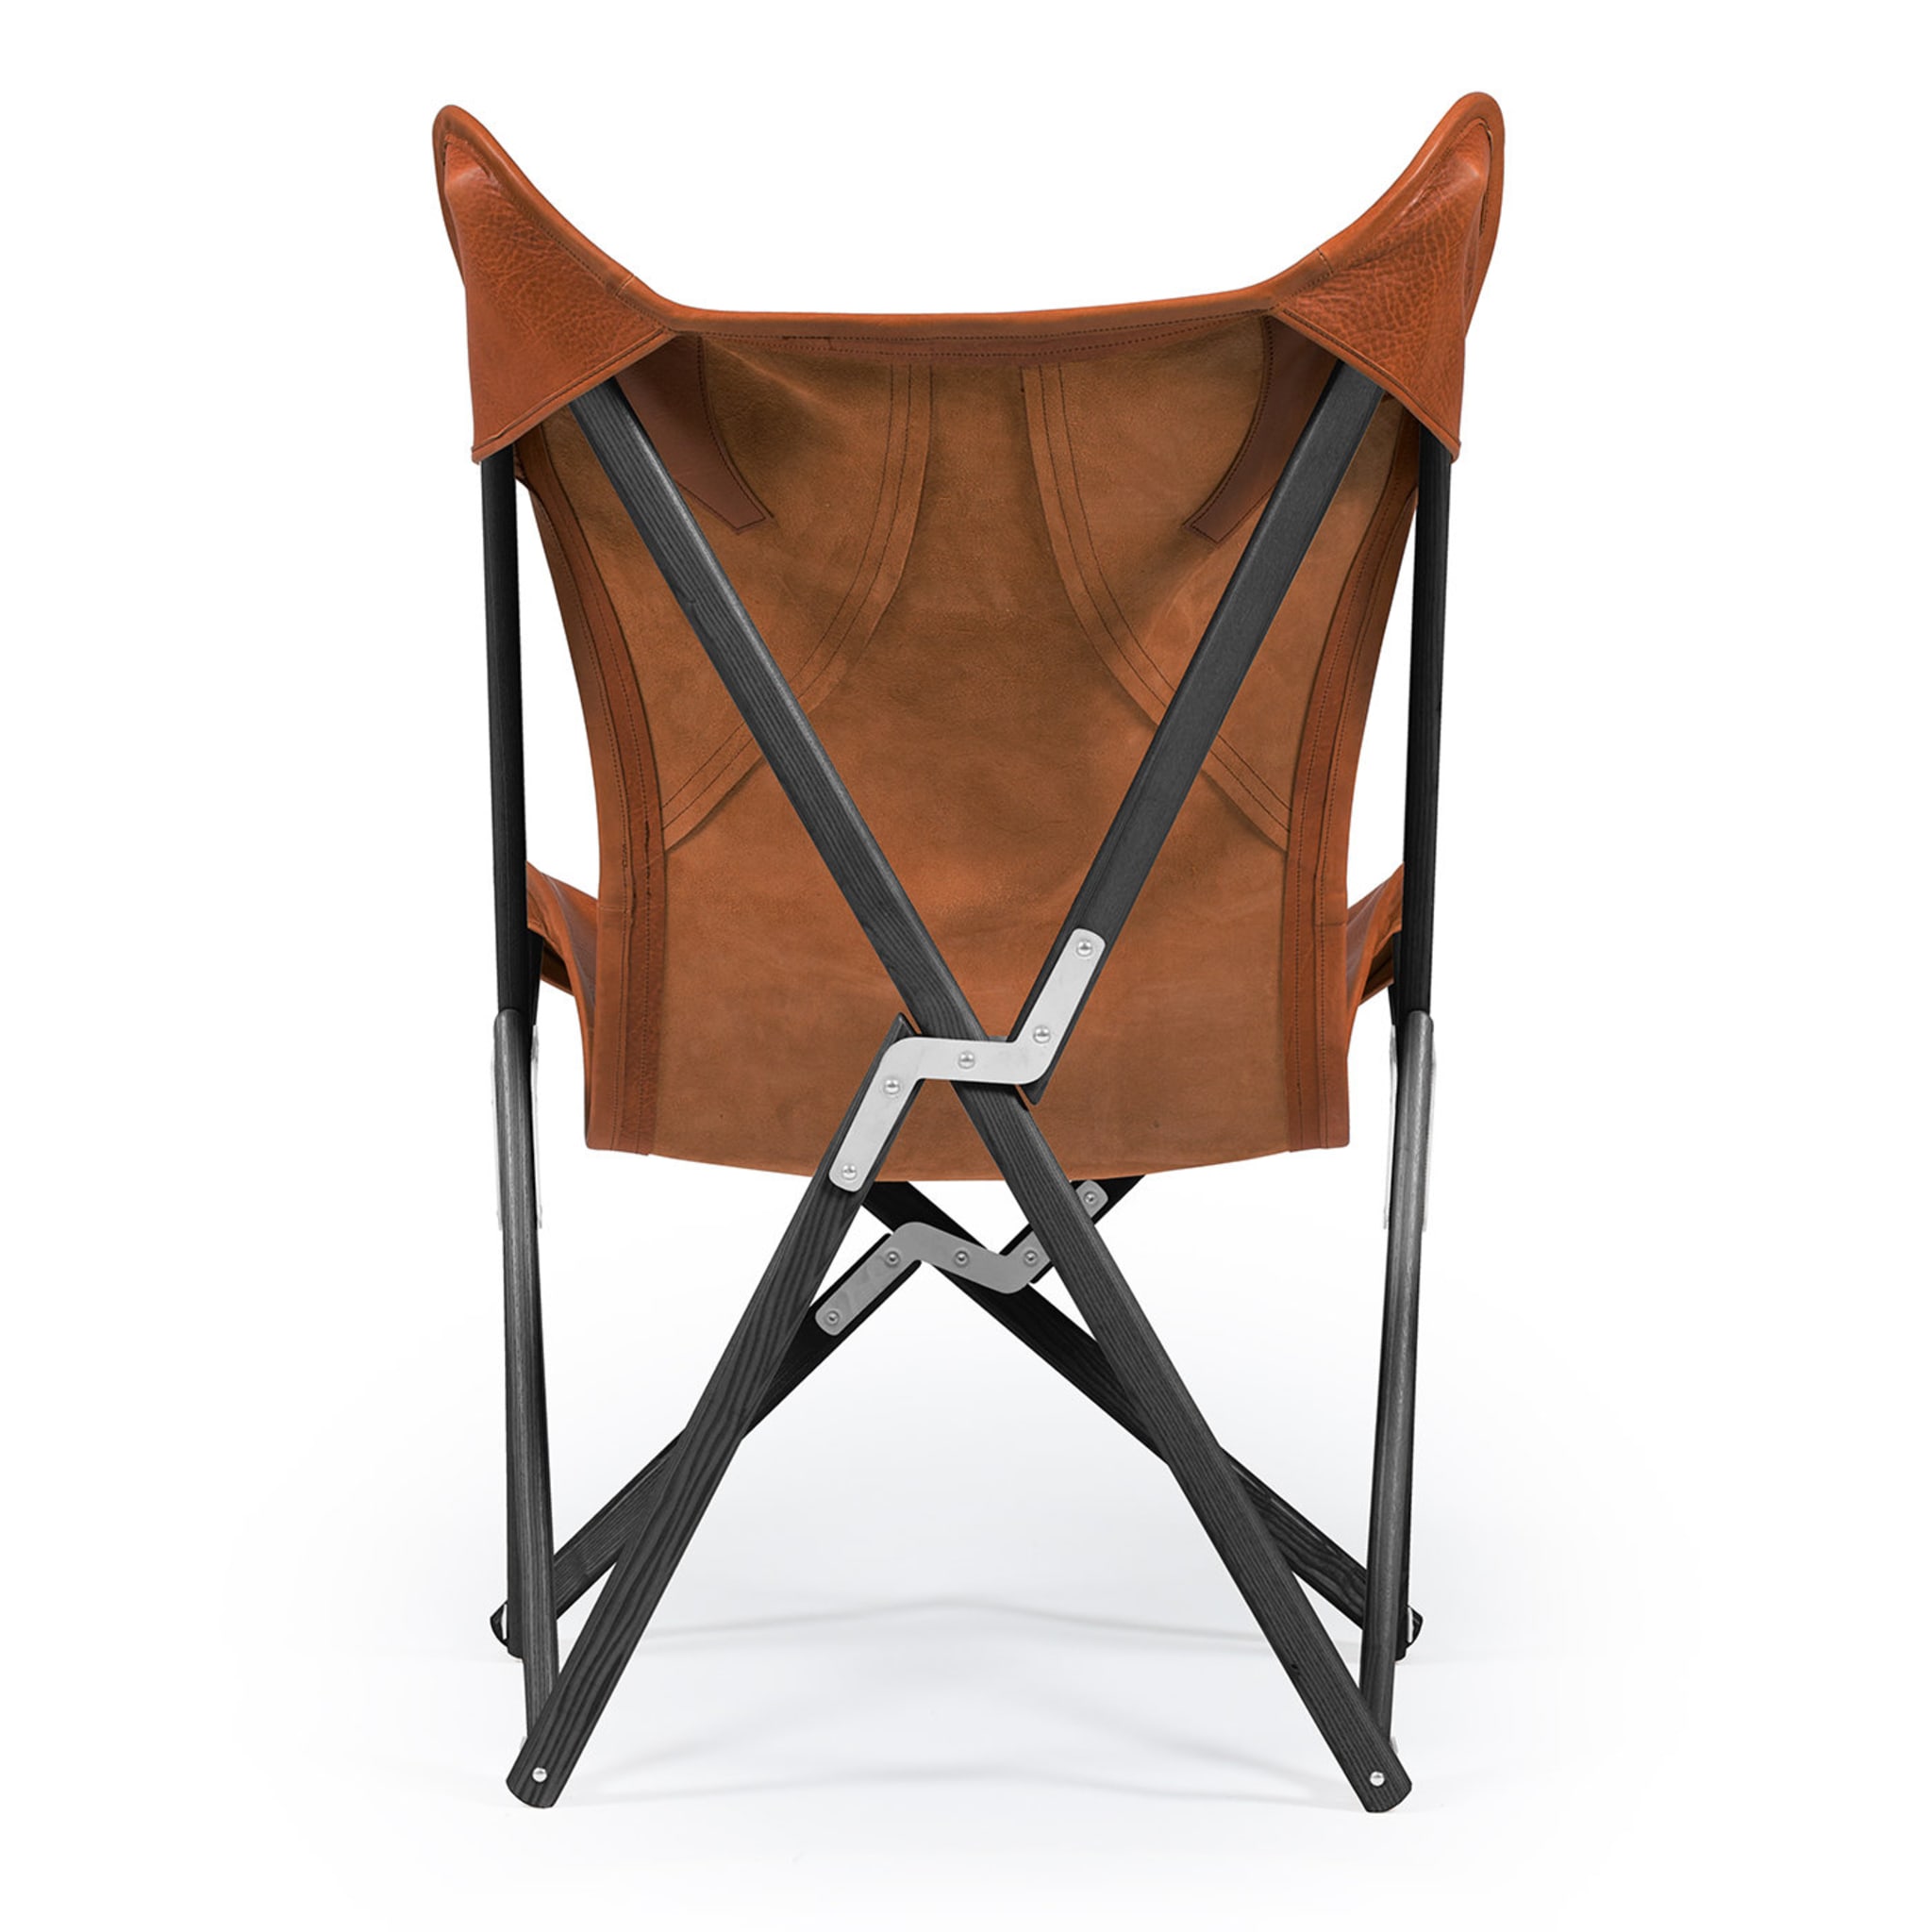 Tripolina Armchair in Brown Leather - Alternative view 2